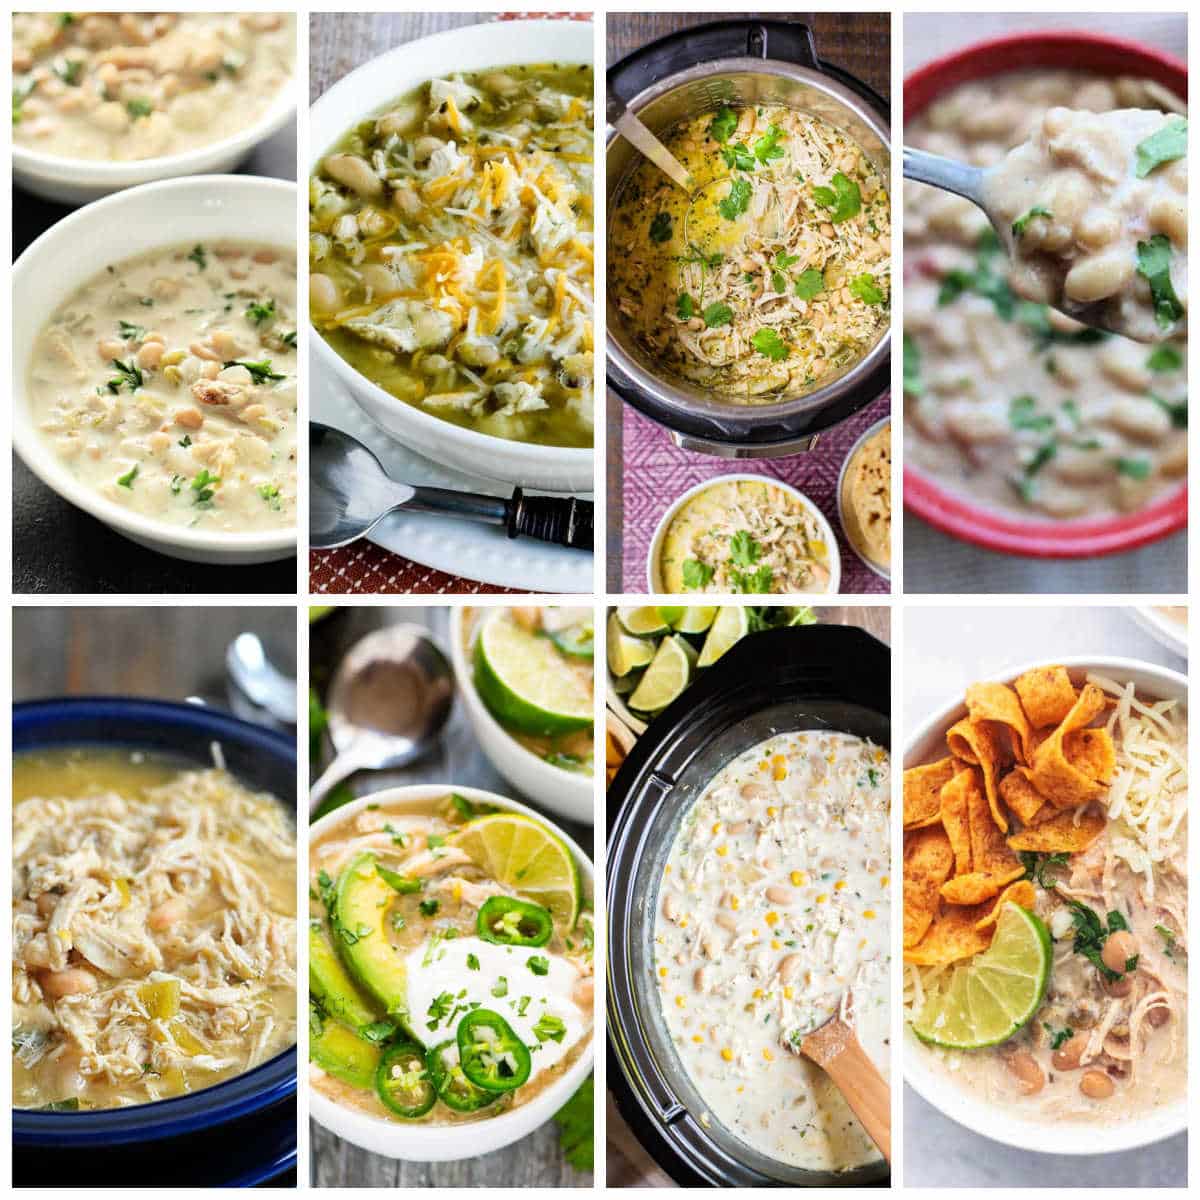 White Bean Chili Recipes (Slow Cooker or Instant Pot) collage of featured recipes.